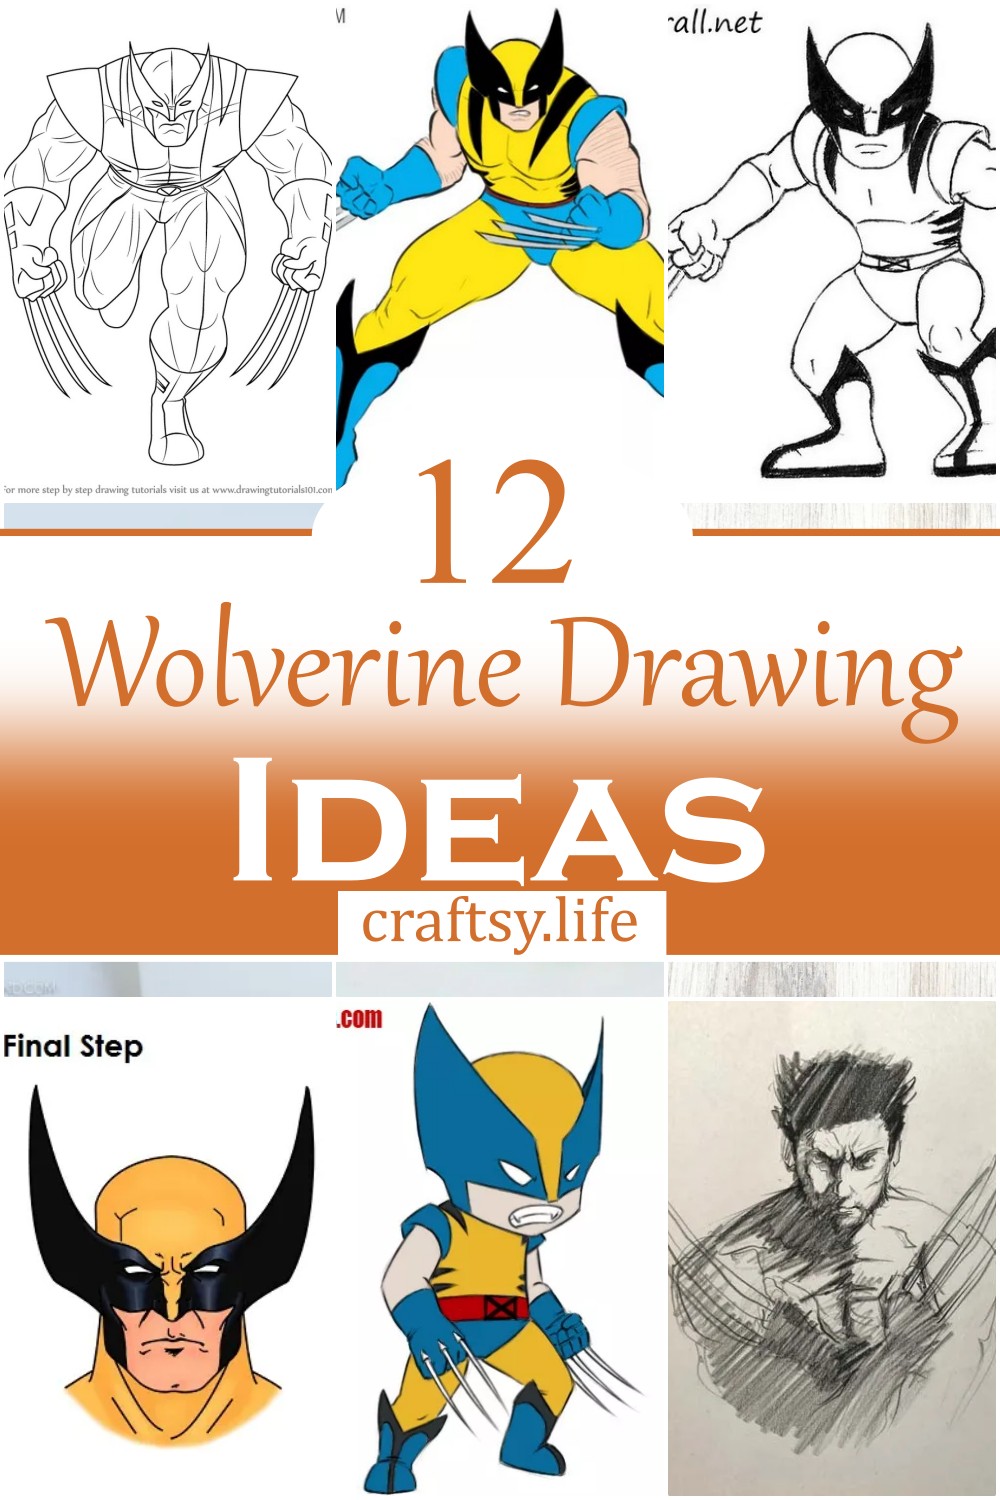 Wolverine Drawing Ideas